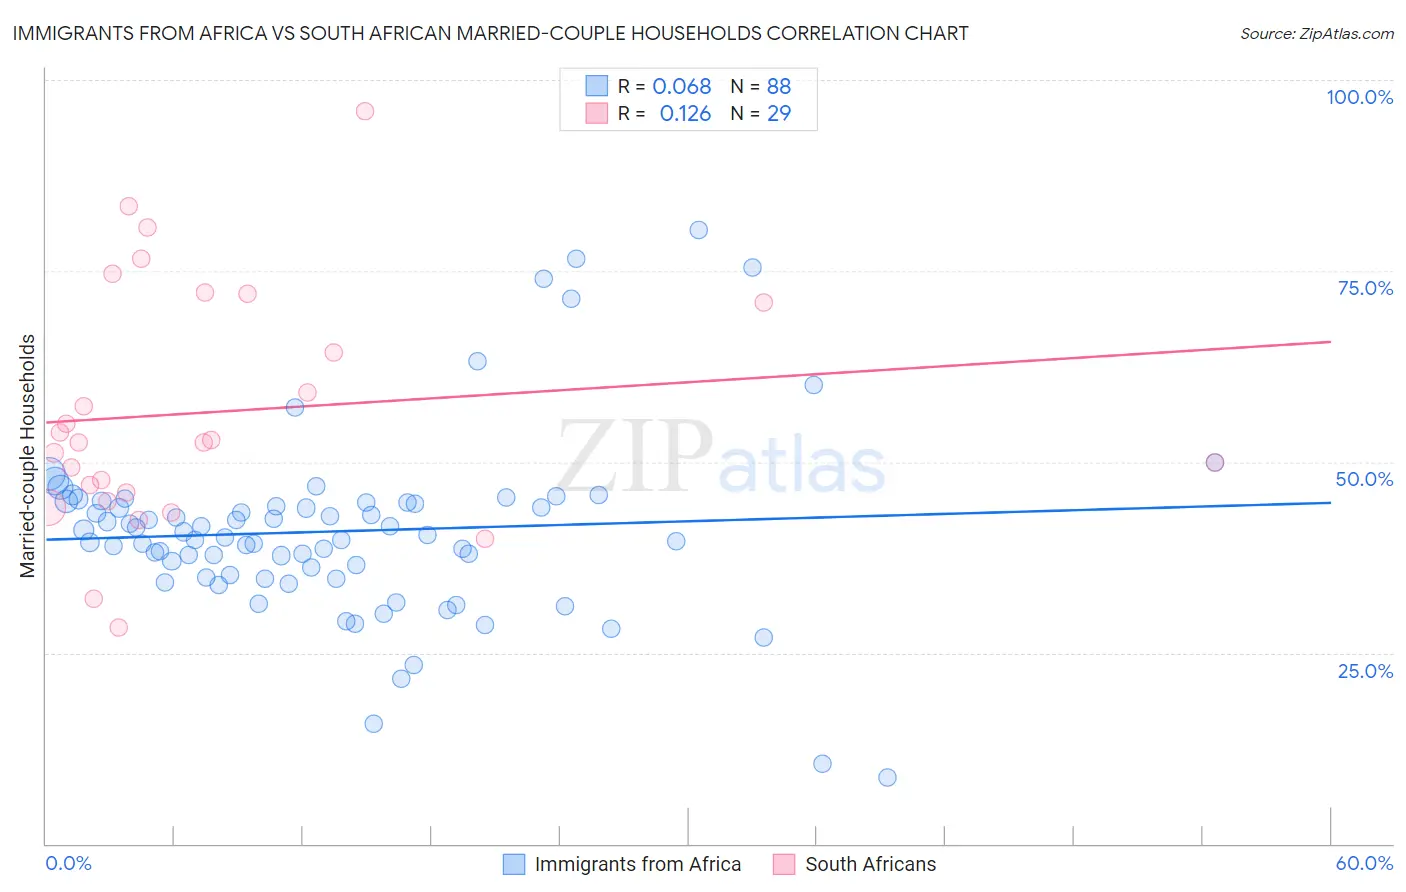 Immigrants from Africa vs South African Married-couple Households